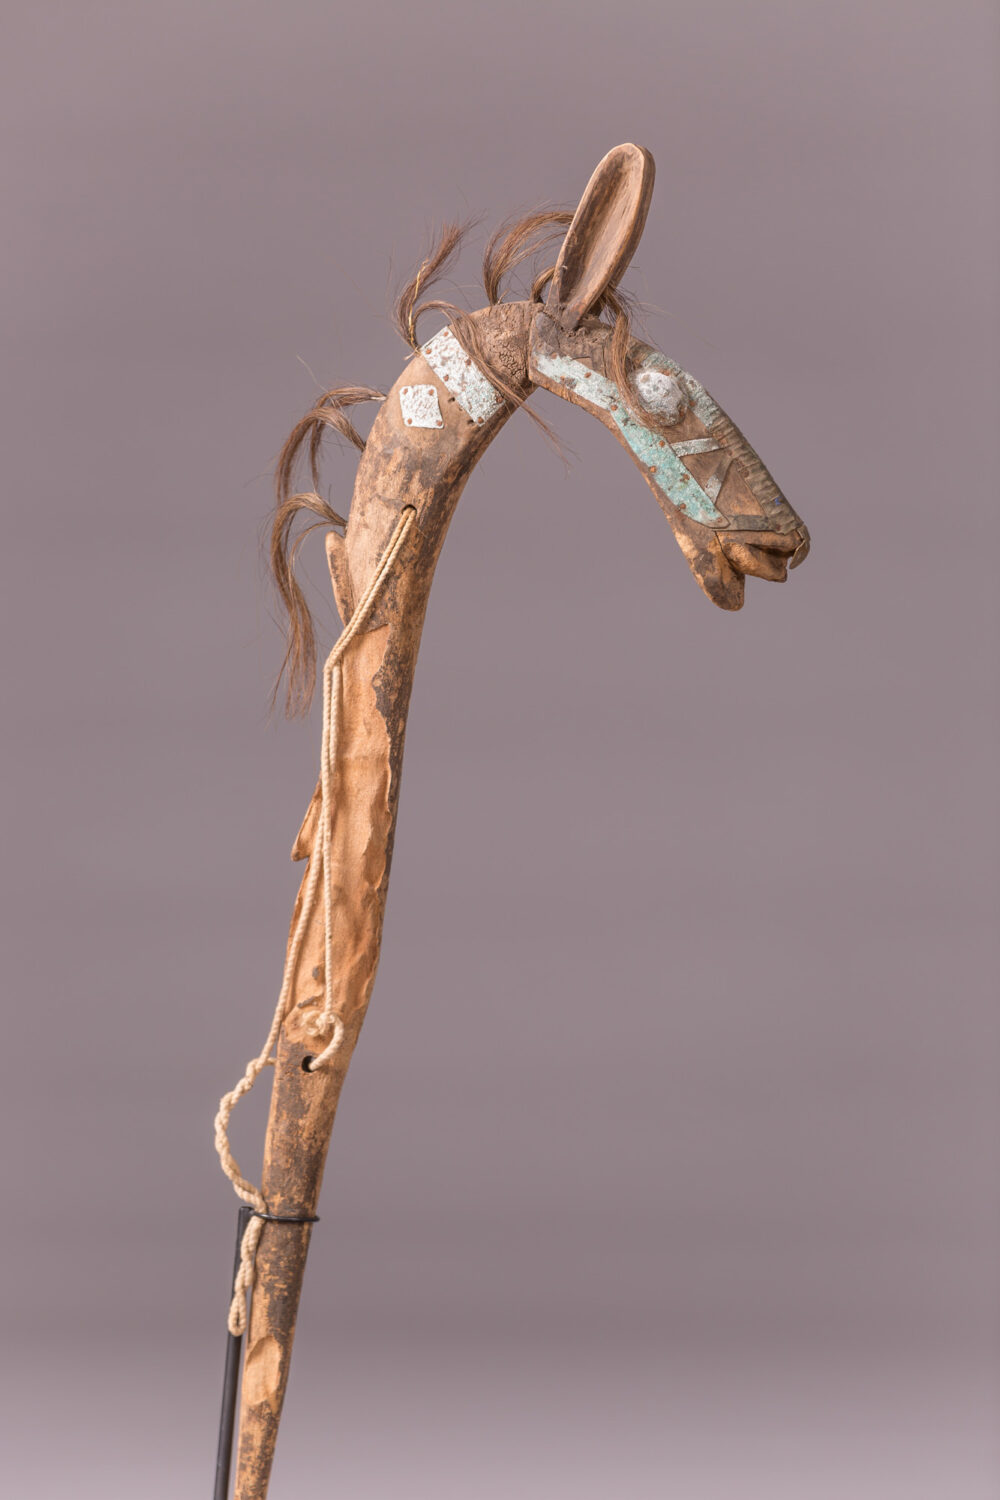 thumbnail of Horse Staff made with wood, animal hair, textile, brass.